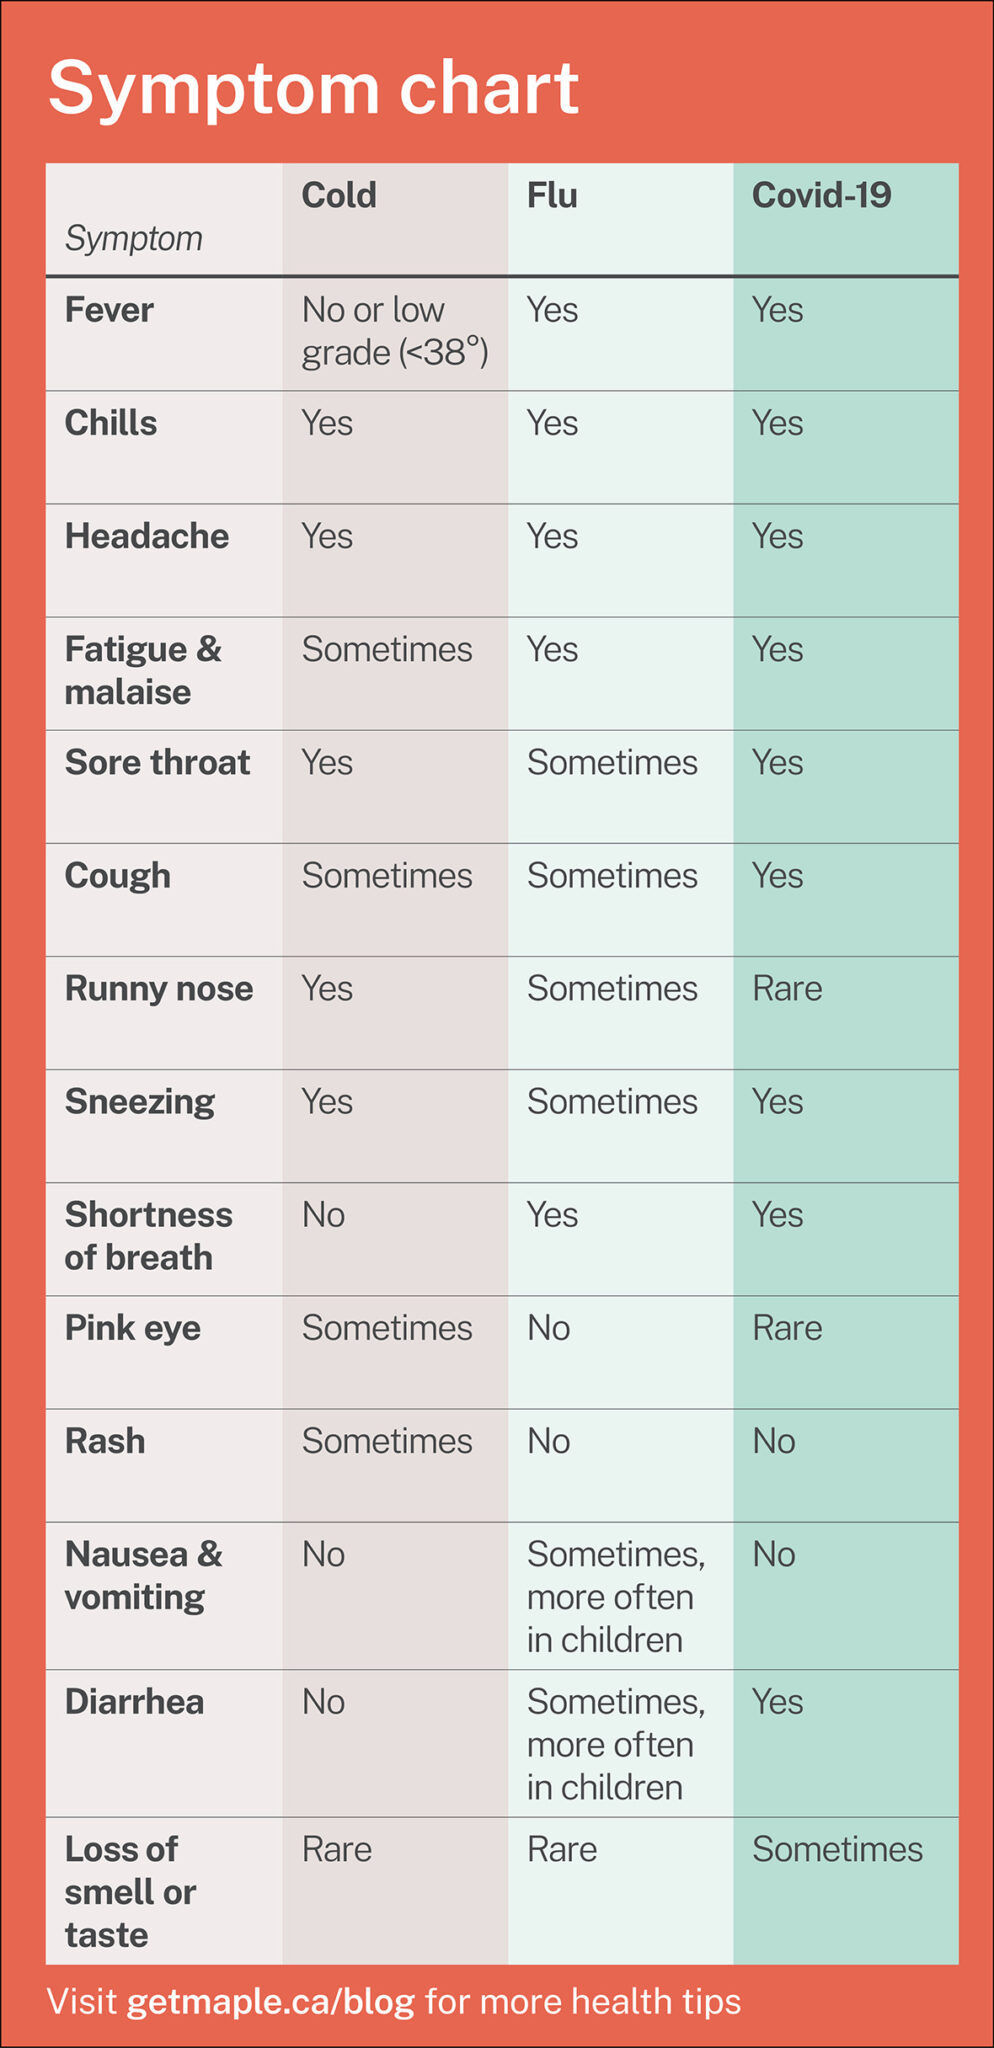 Symptom chart for cold, flu and covid-19 including fever, chills, headaches and more